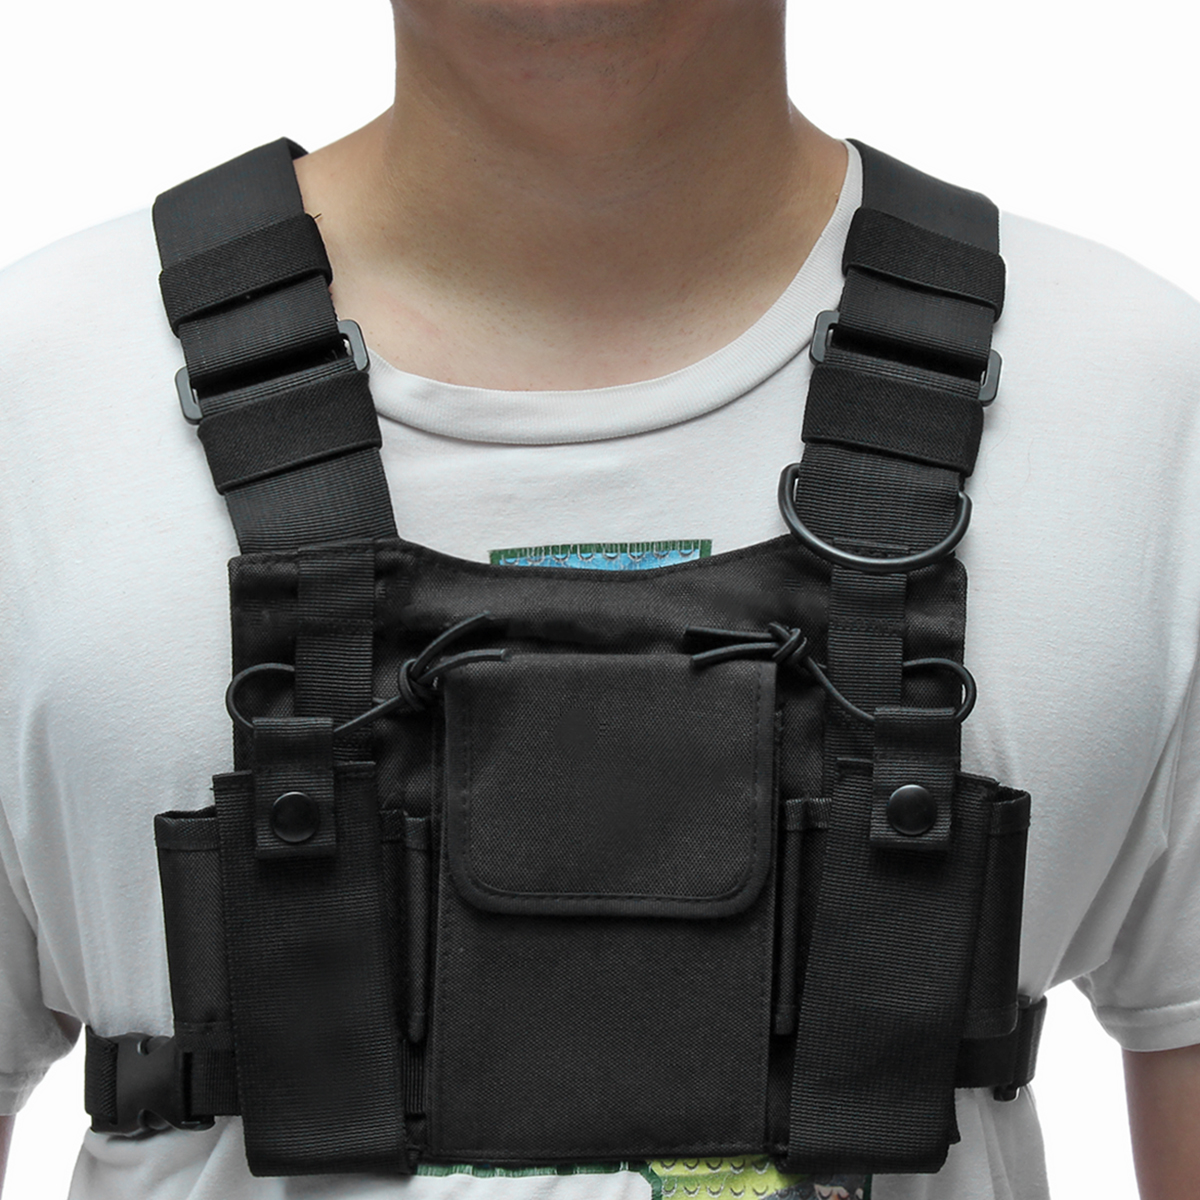 Chest-3-Pocket-Harness-Nylon-Bag-Pack-Backpack-Holster-for-Radio-Walkie-Talkie-Two-Way-Radio-1350160-8